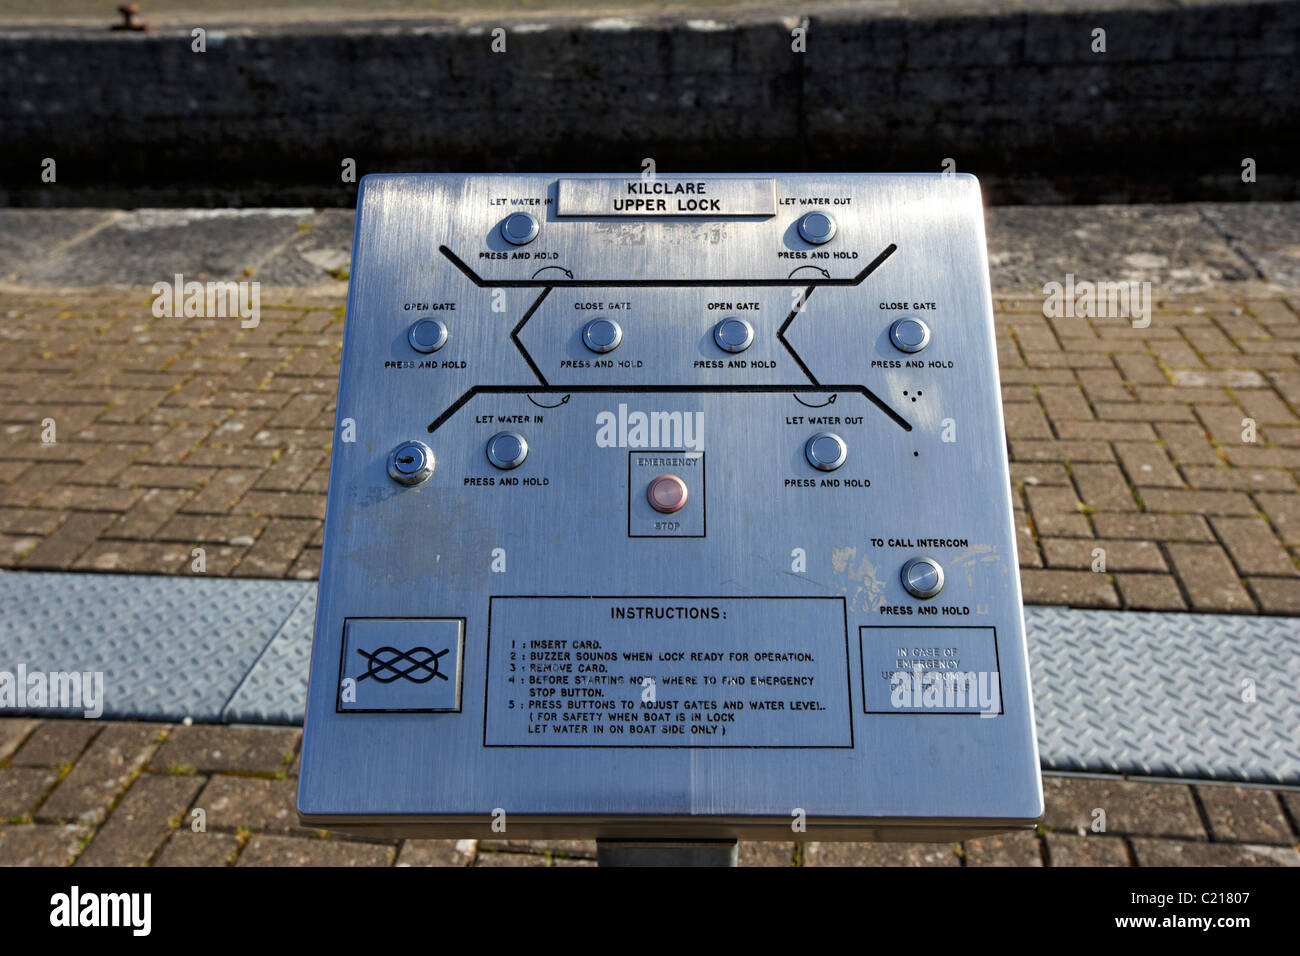 electronic lock controls for Lock 9 Kilclare Upper Lock Shannon-Erne Waterway County Leitrim Republic of Ireland Stock Photo